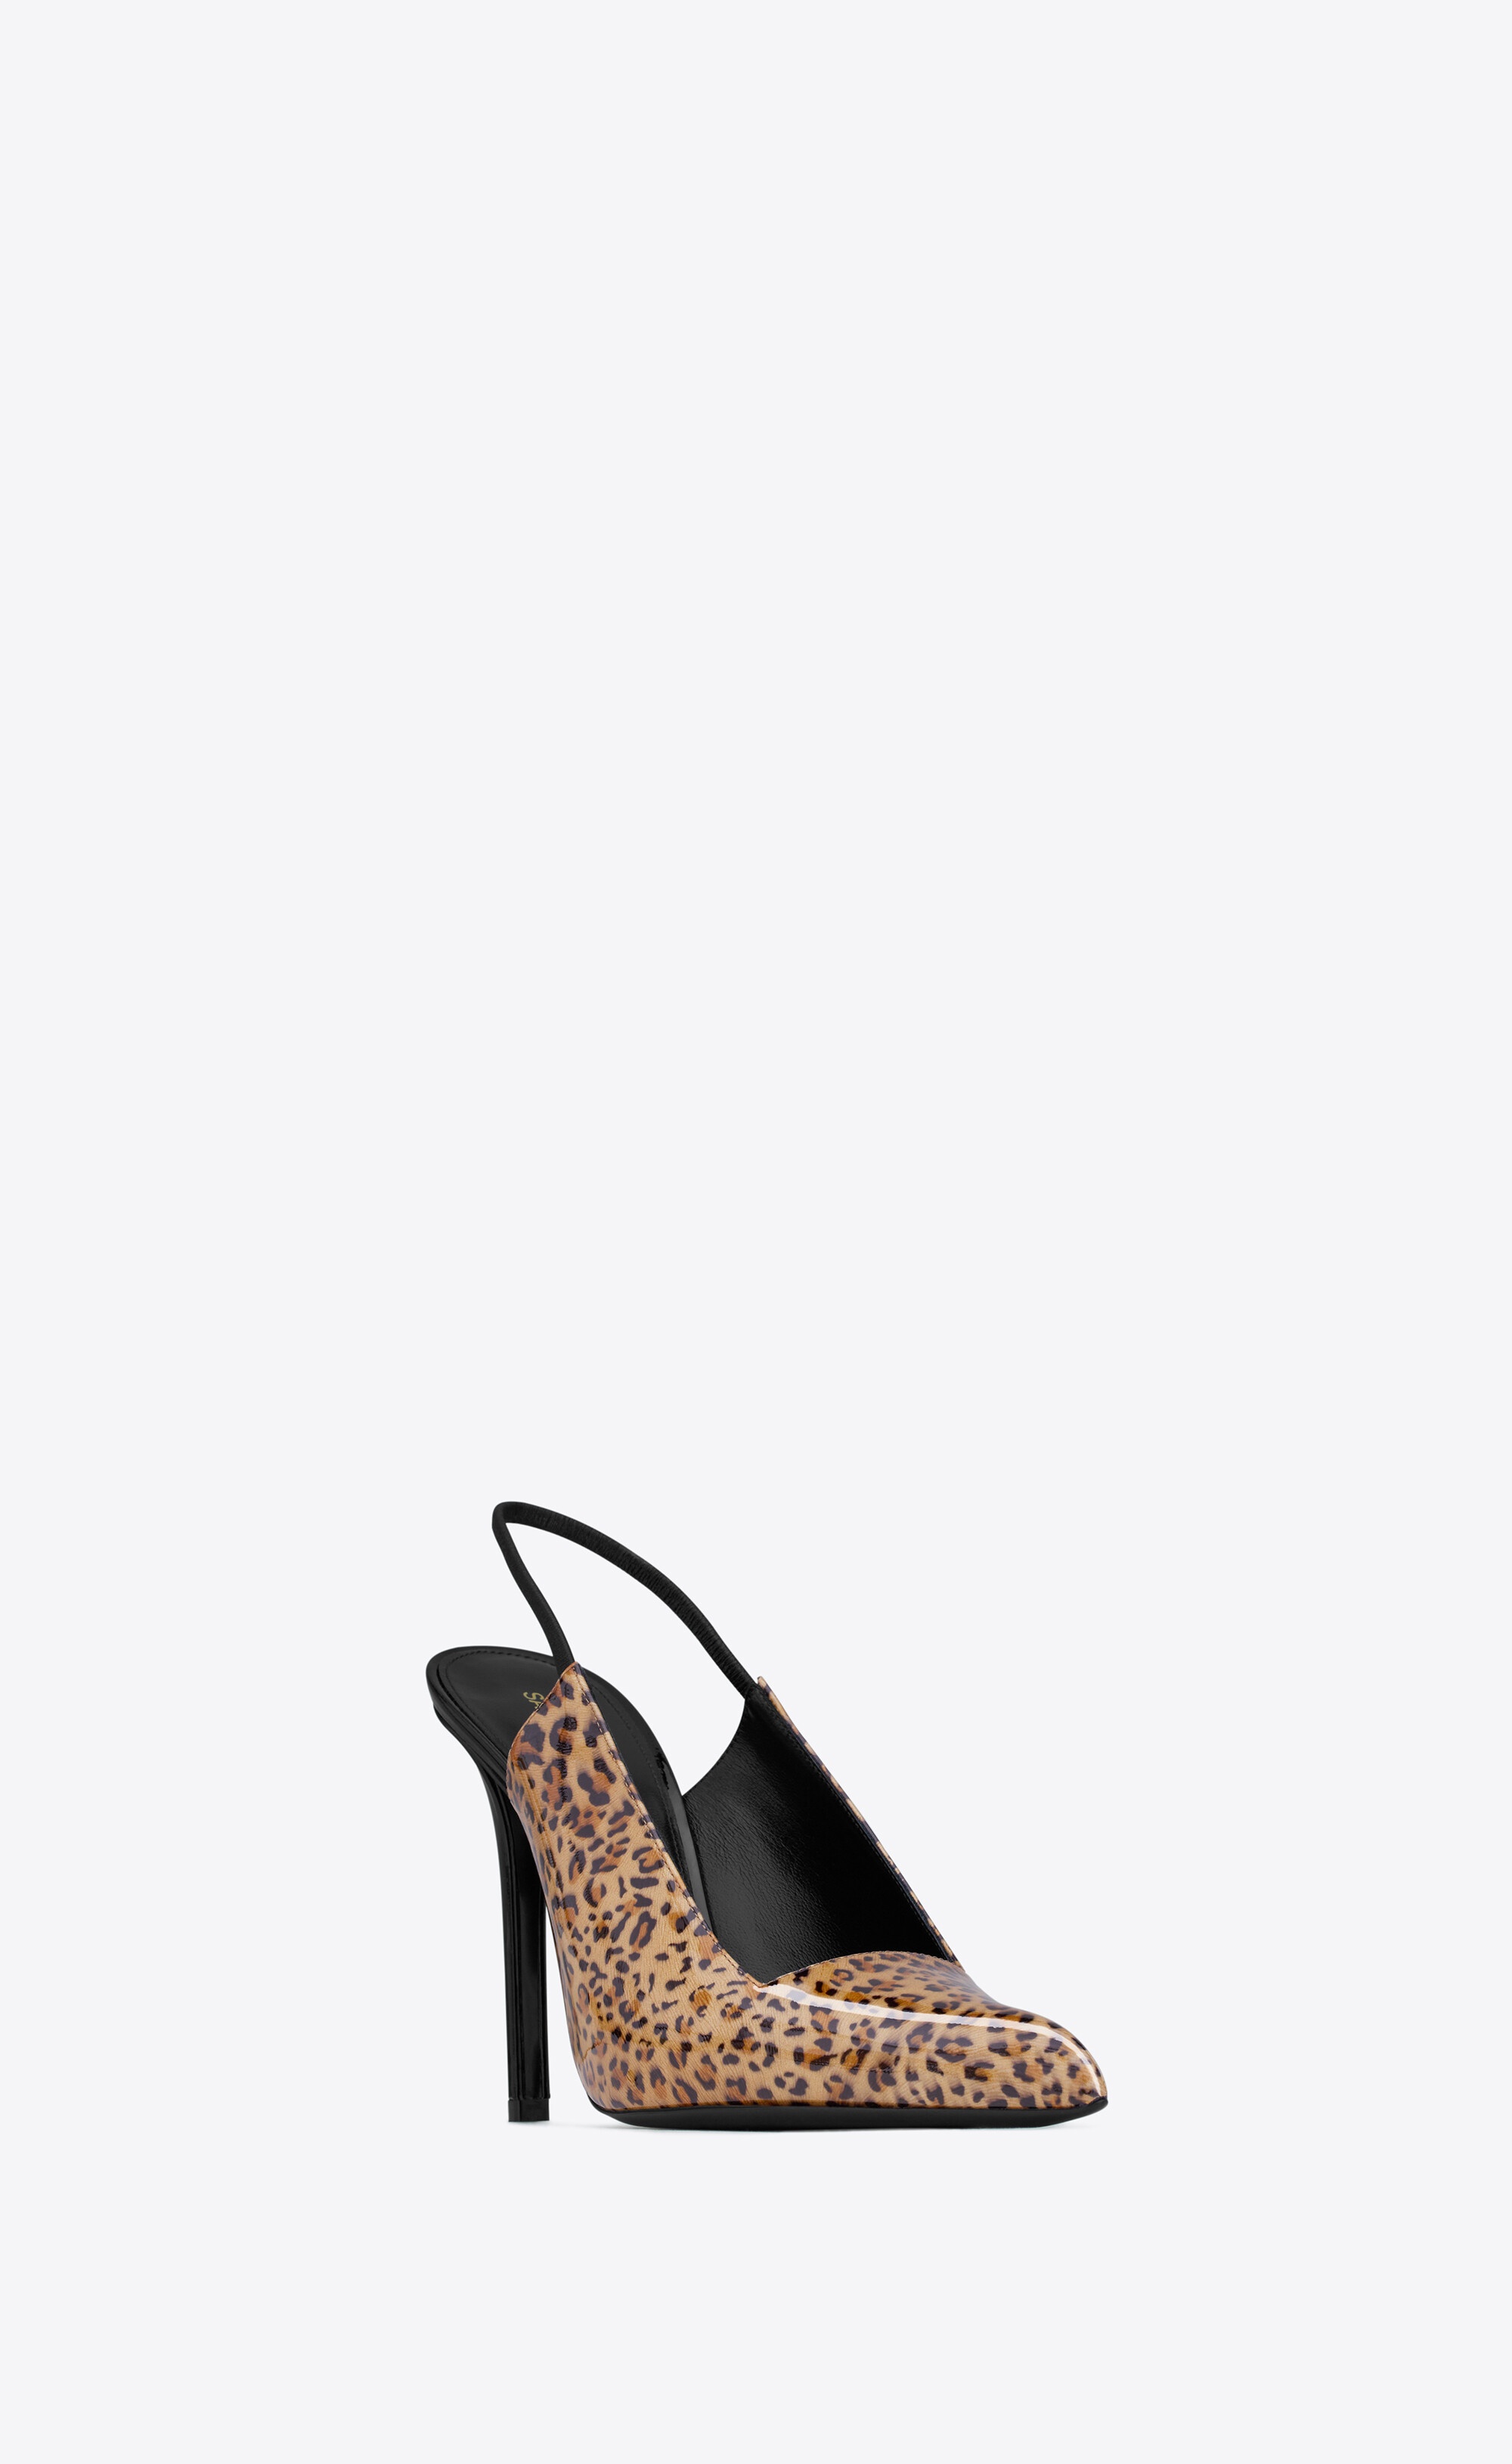 raven slingback pumps in leopard-print patent leather - 3